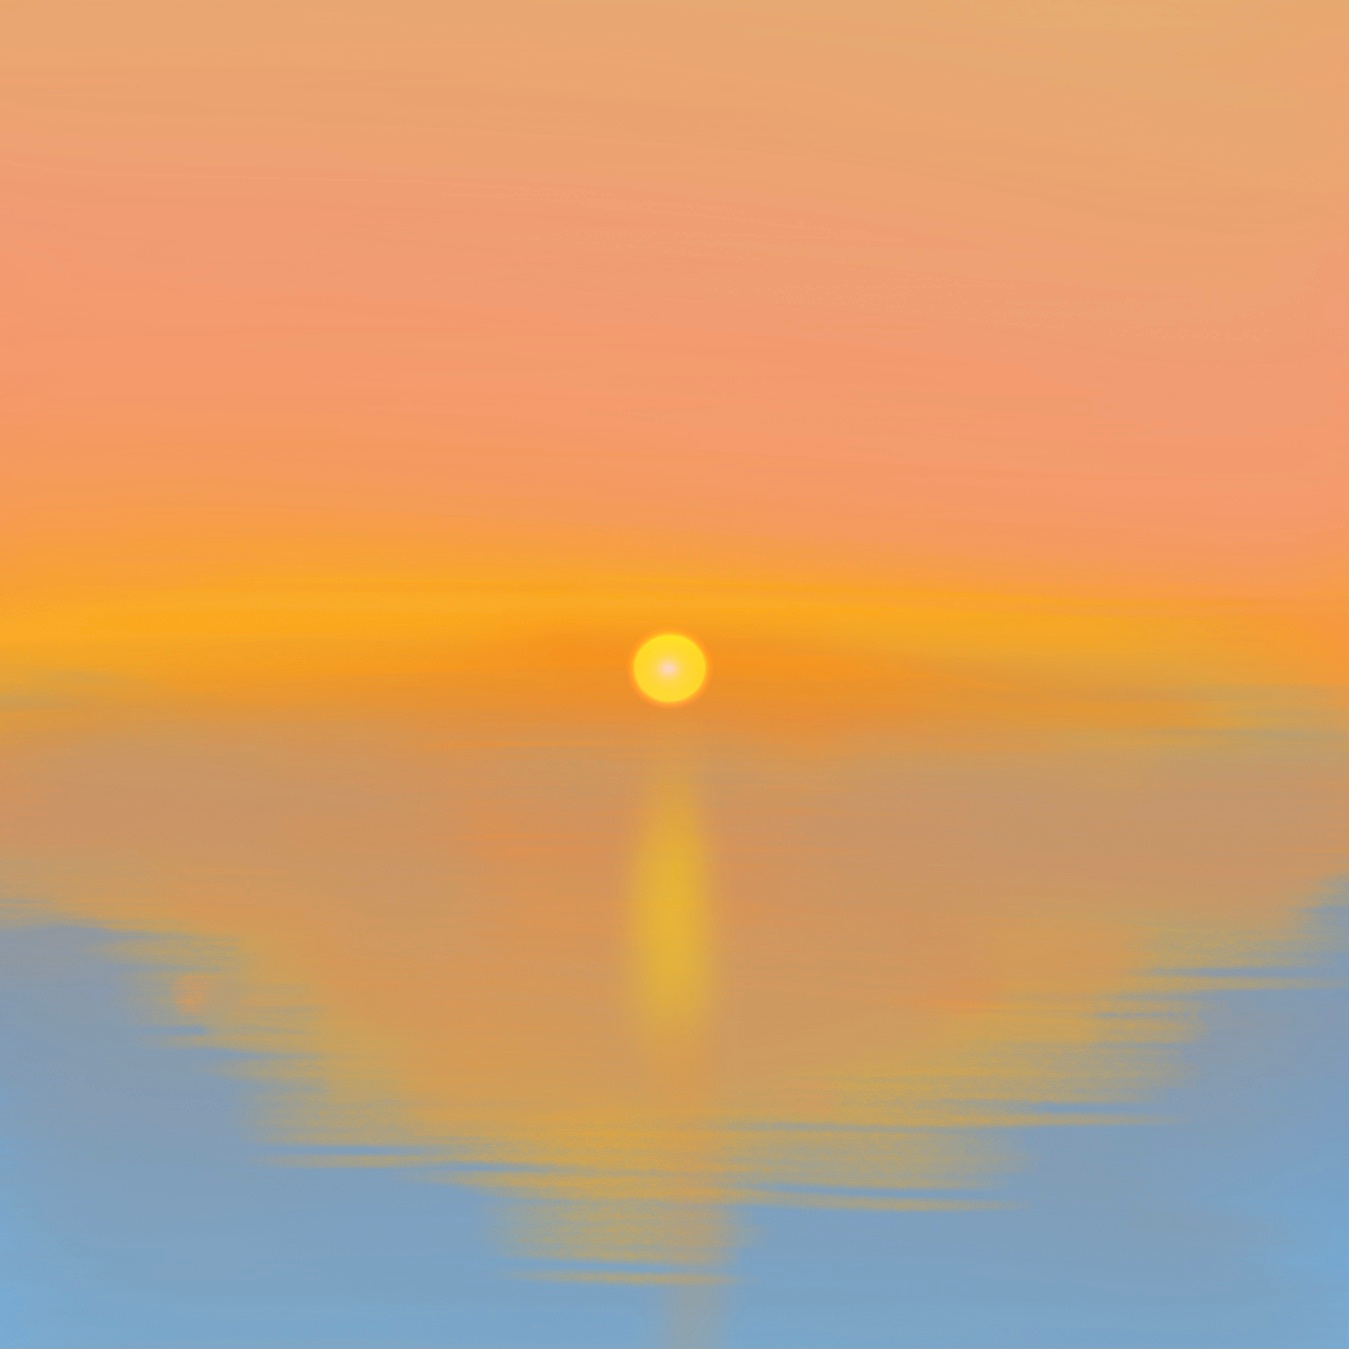 Sunset at the Sea